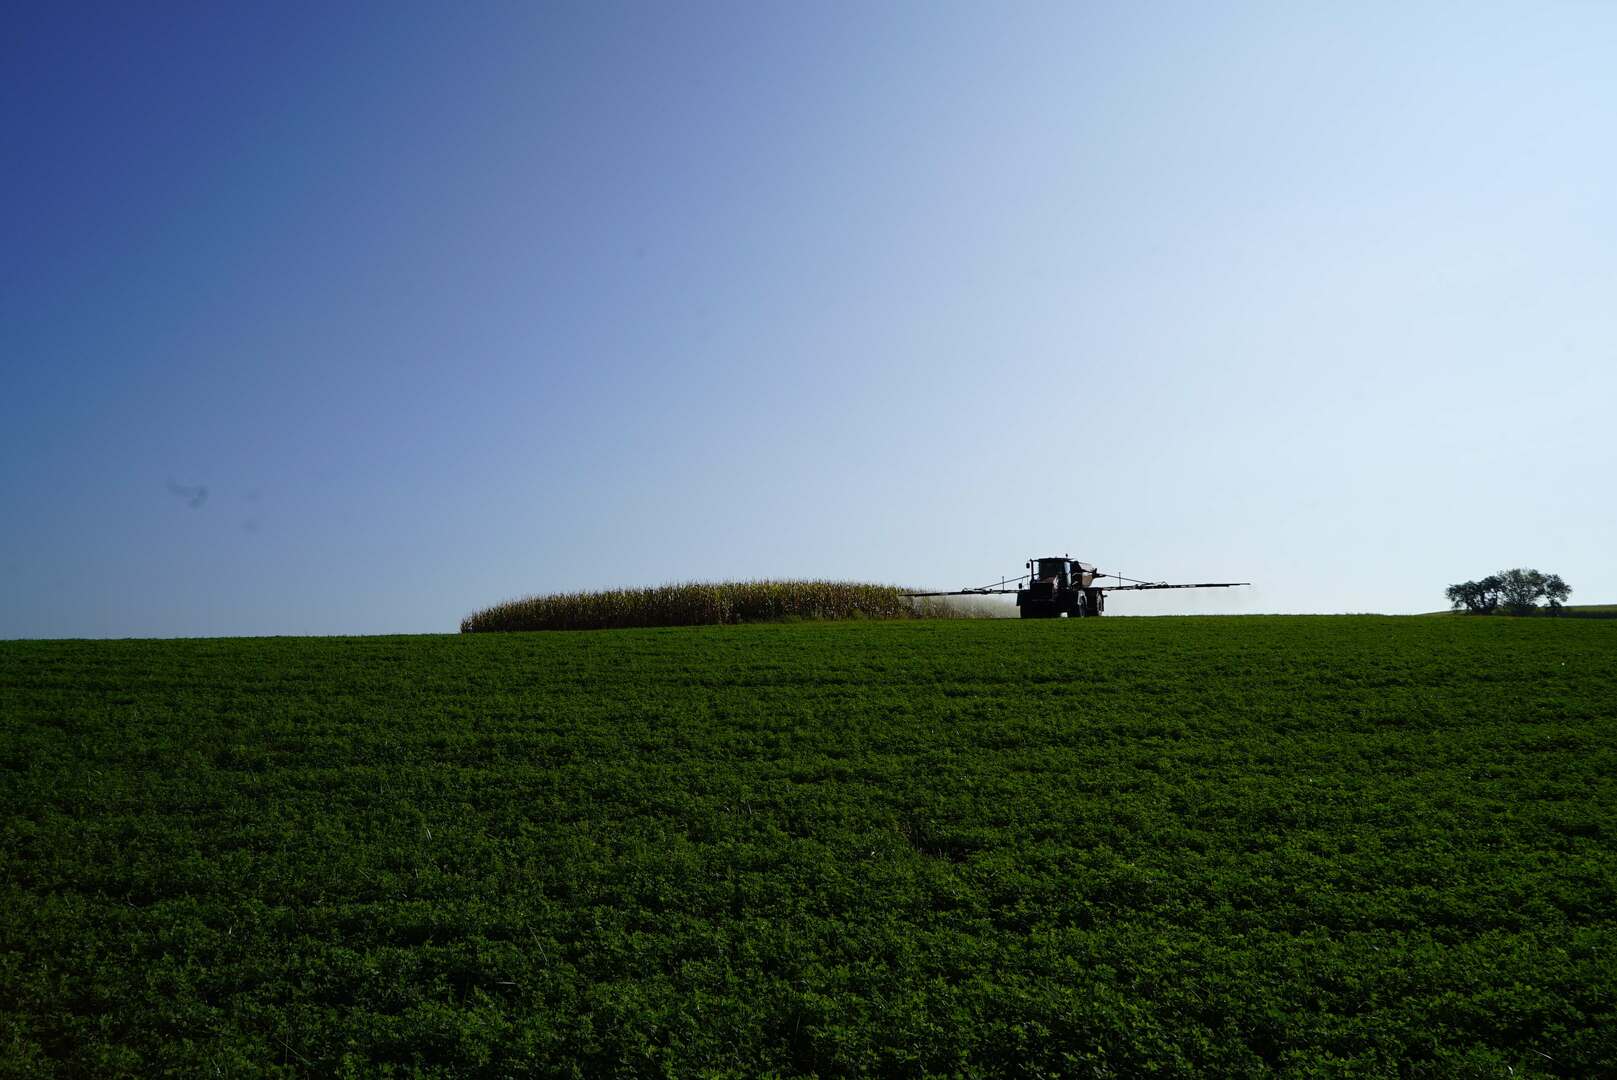 A tractor is seen off in the distance of a field using sprayers to distribute chemicals on the field to help crops grow and eliminate pests